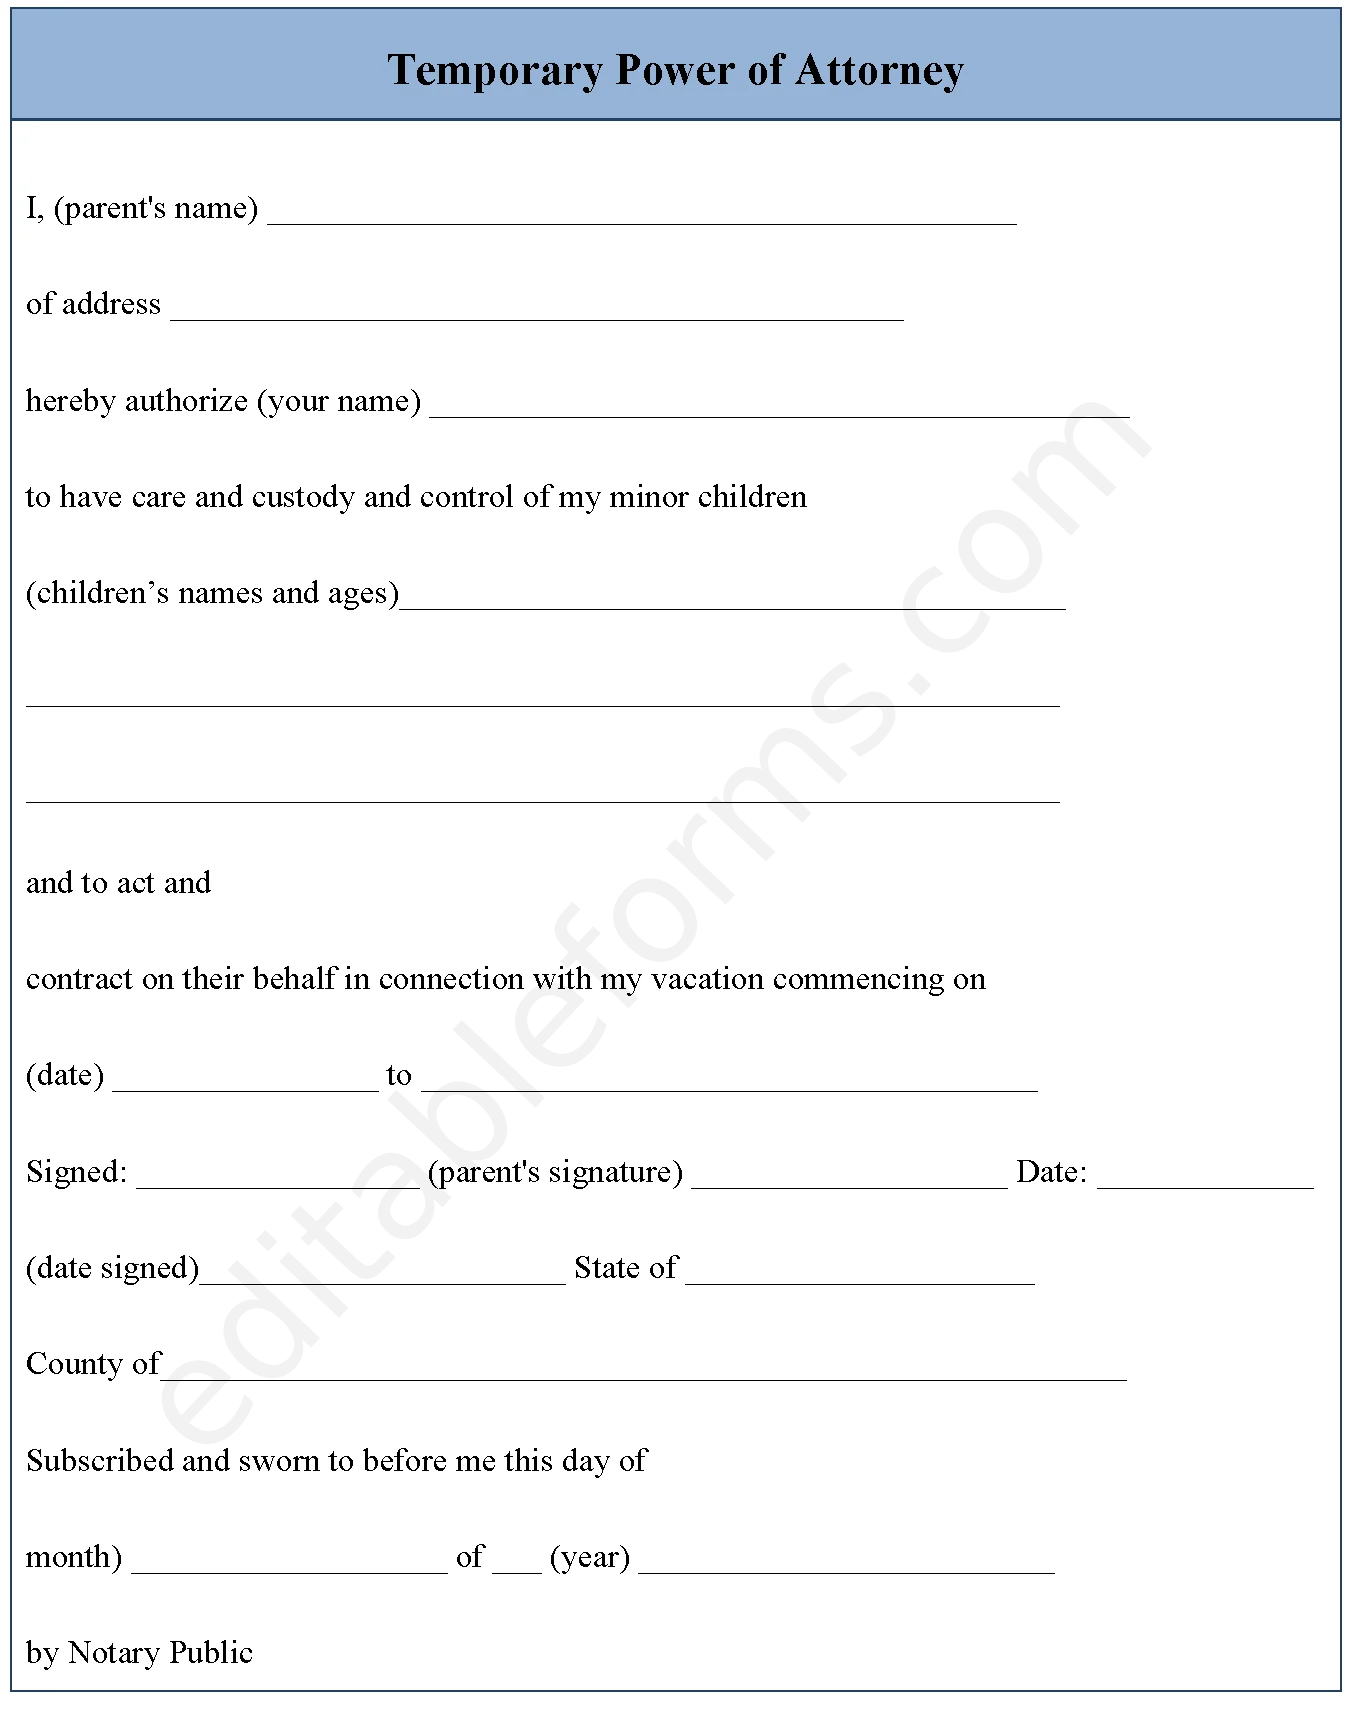 Temporary Power Of Attorney Fillable PDF Template